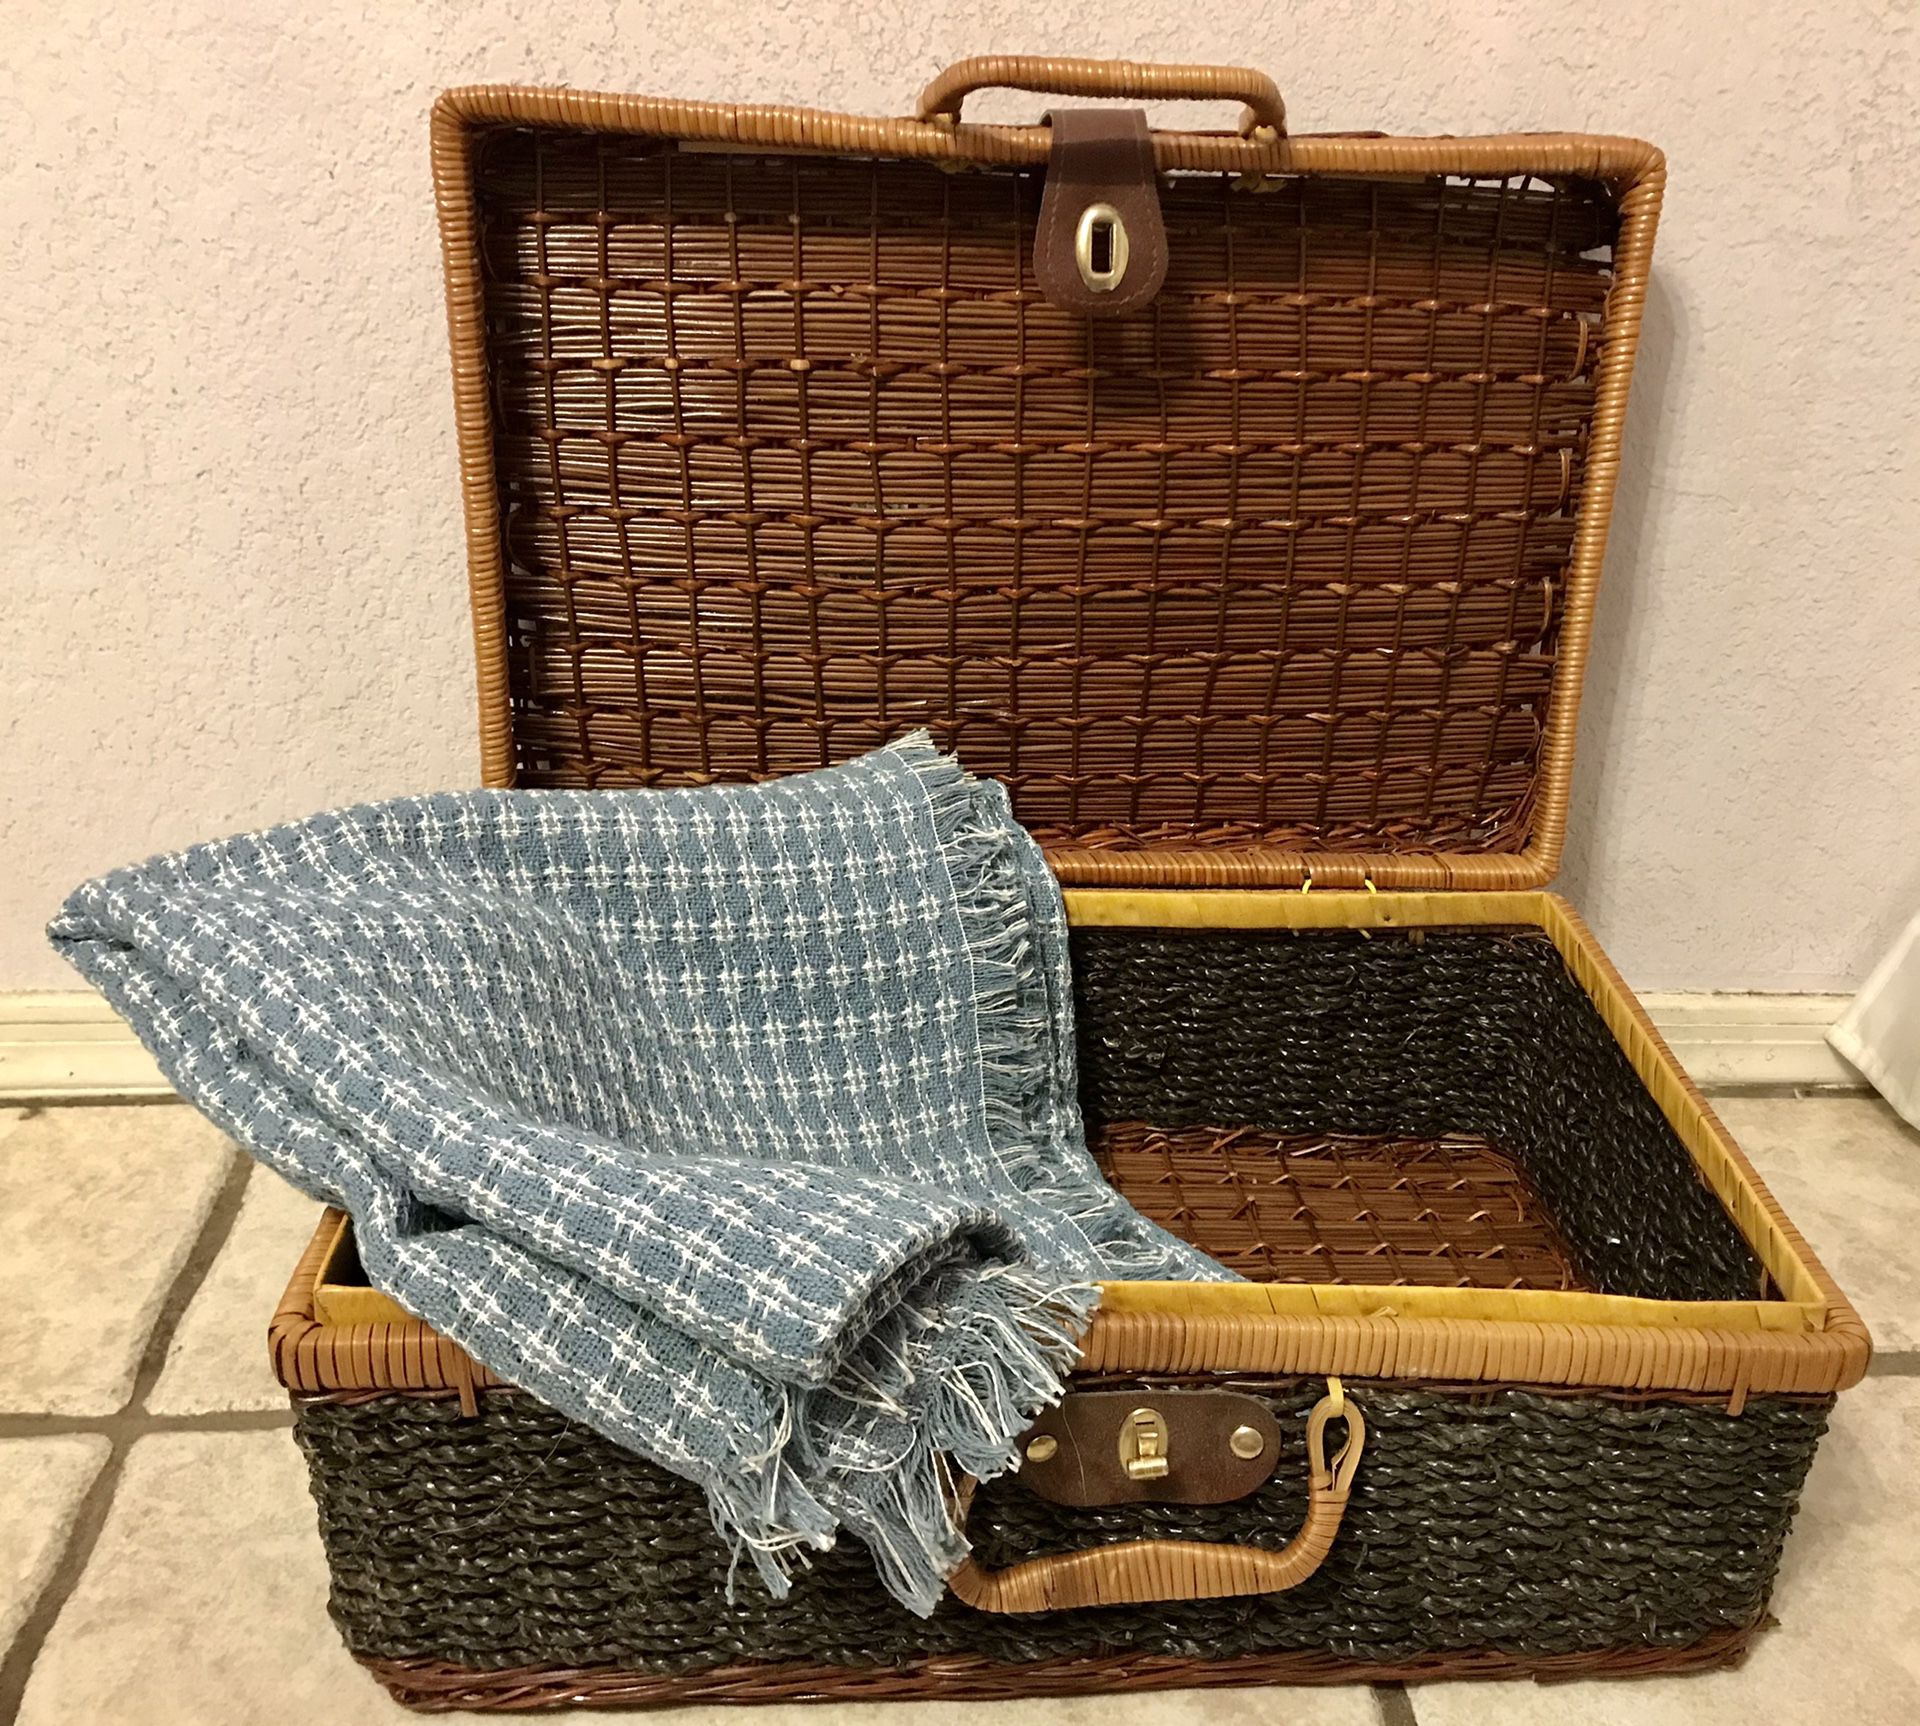 Wicker picnic basket and blanket